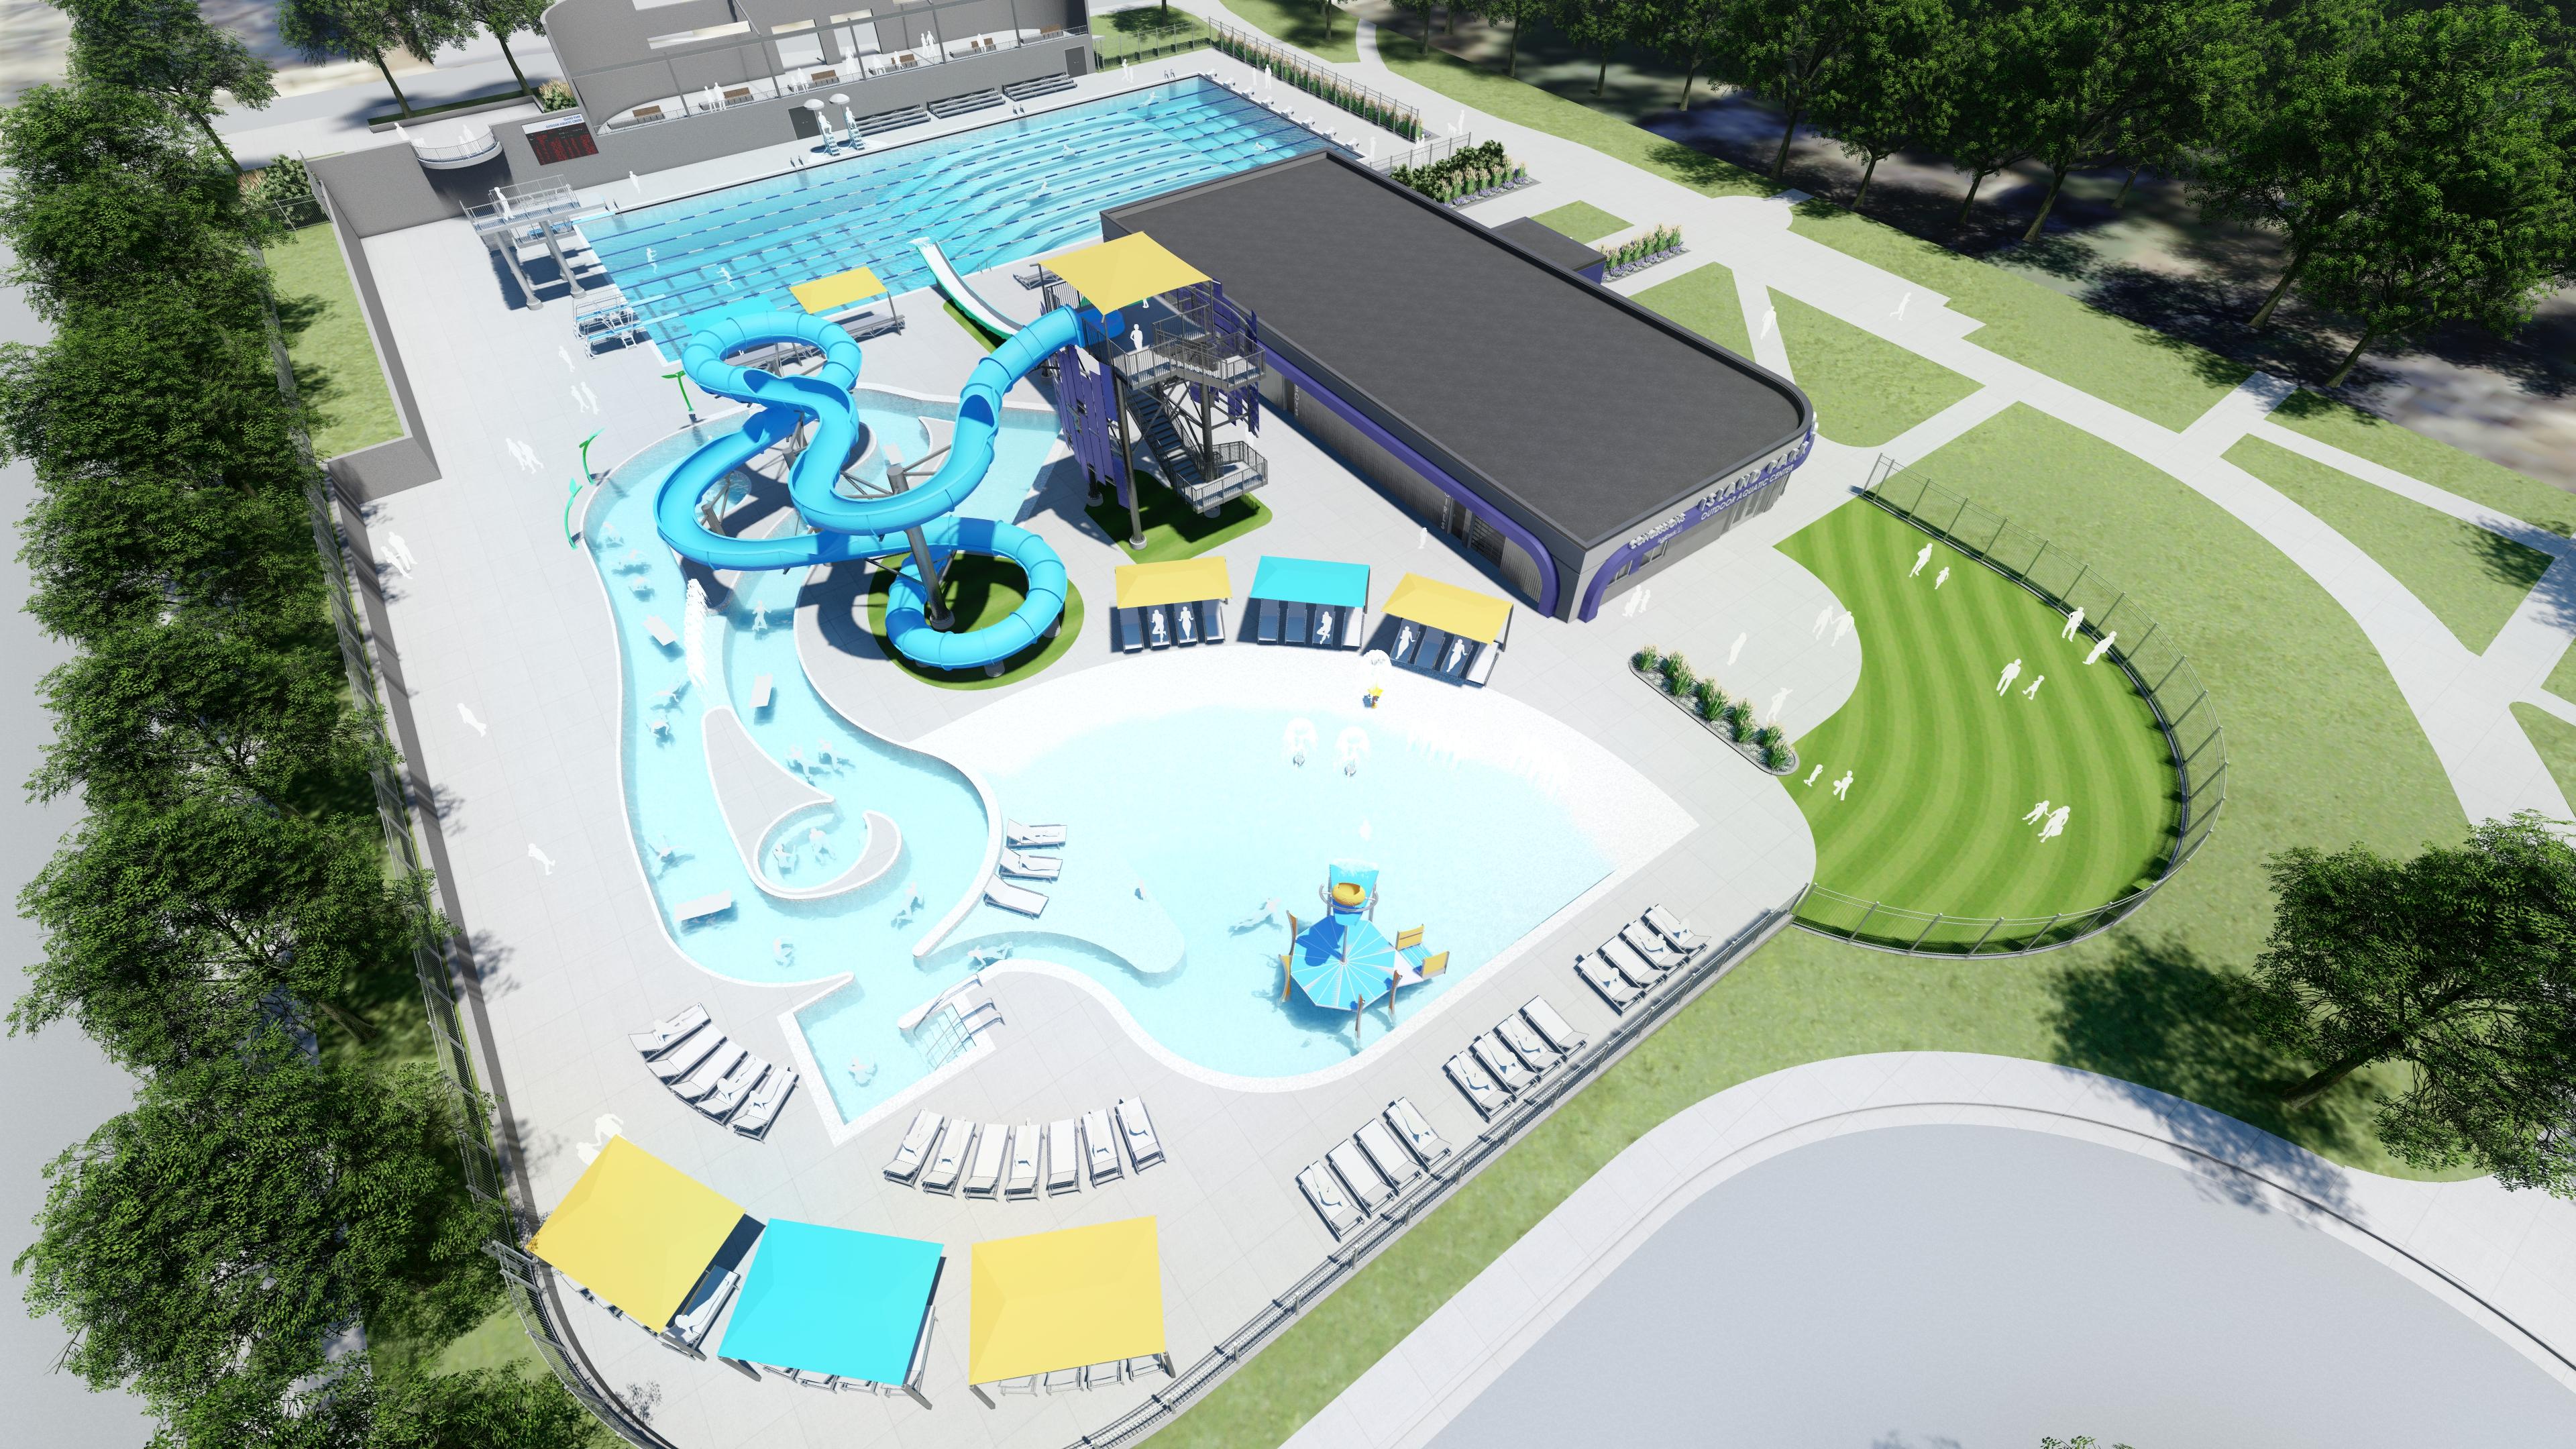 This image shows an aerial view of Island Park Pool